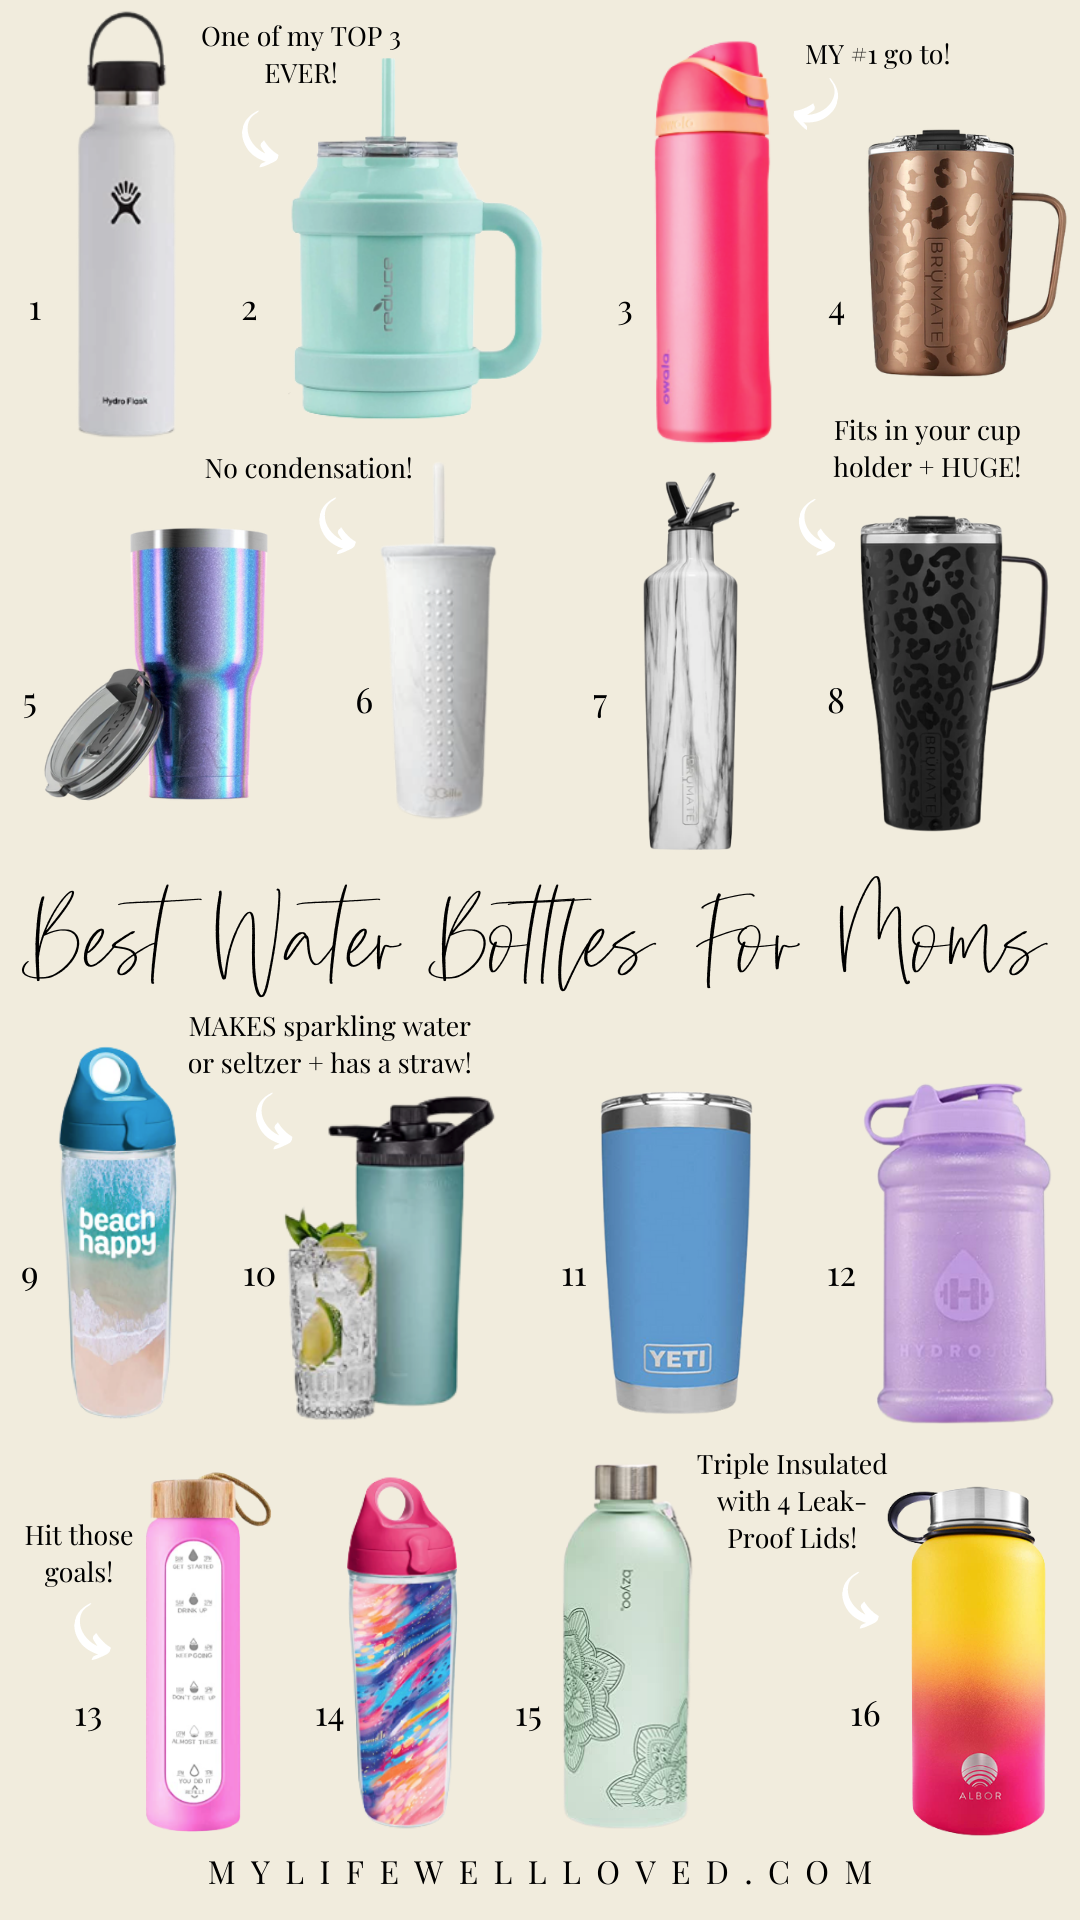 https://www.mylifewellloved.com/wp-content/uploads/Best-Water-Bottles-For-Moms1.png